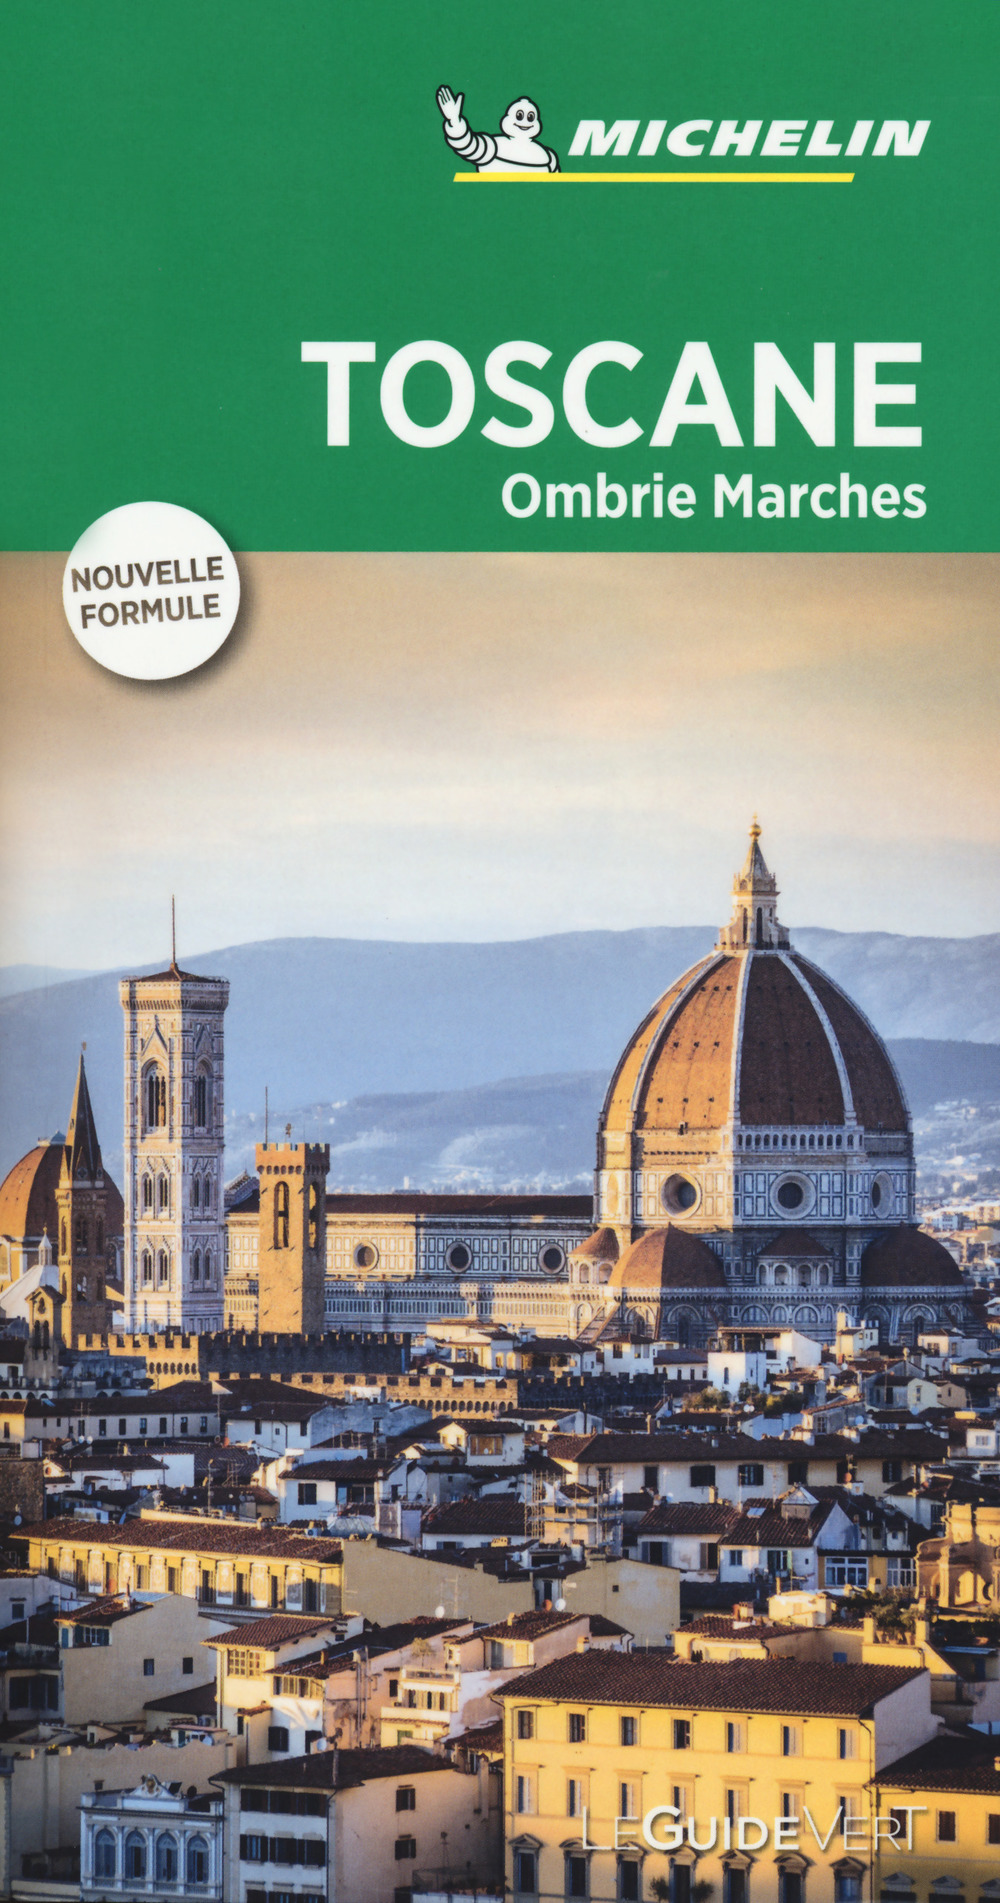 Toscane Ombrie Marches